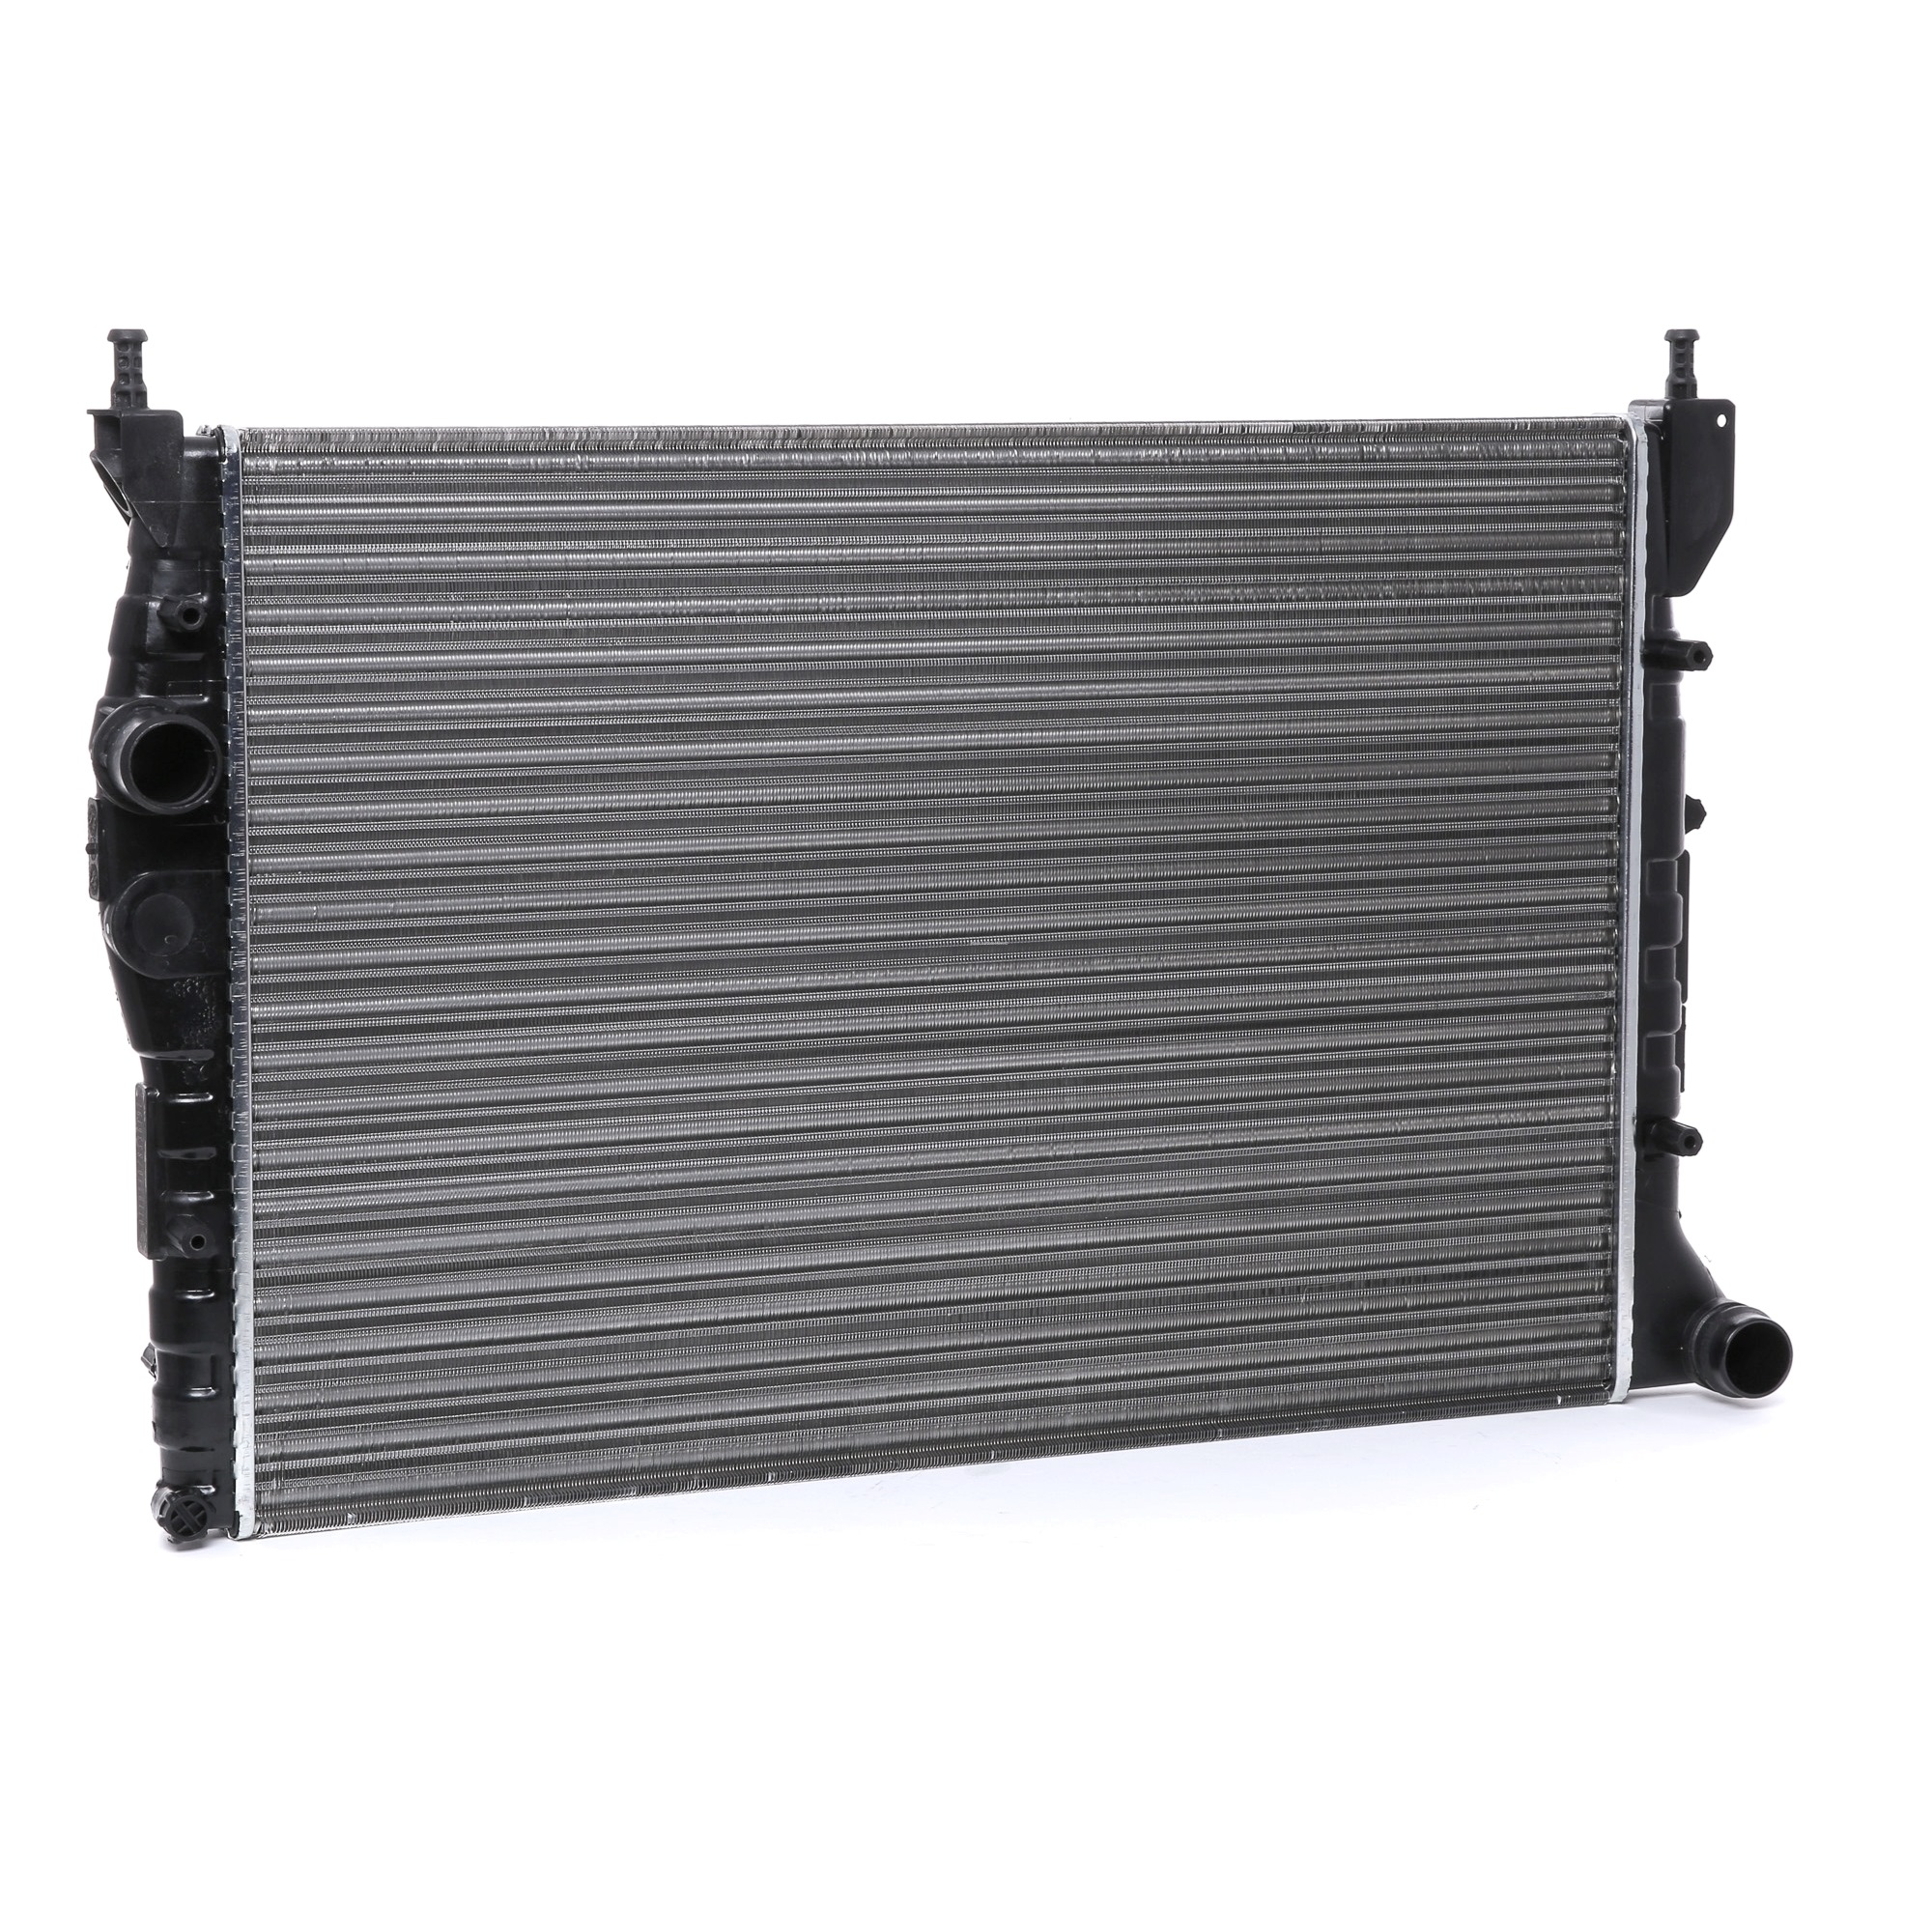 STARK SKRD-0120611 Engine radiator Aluminium, 580 x 415 x 34 mm, without frame, Mechanically jointed cooling fins